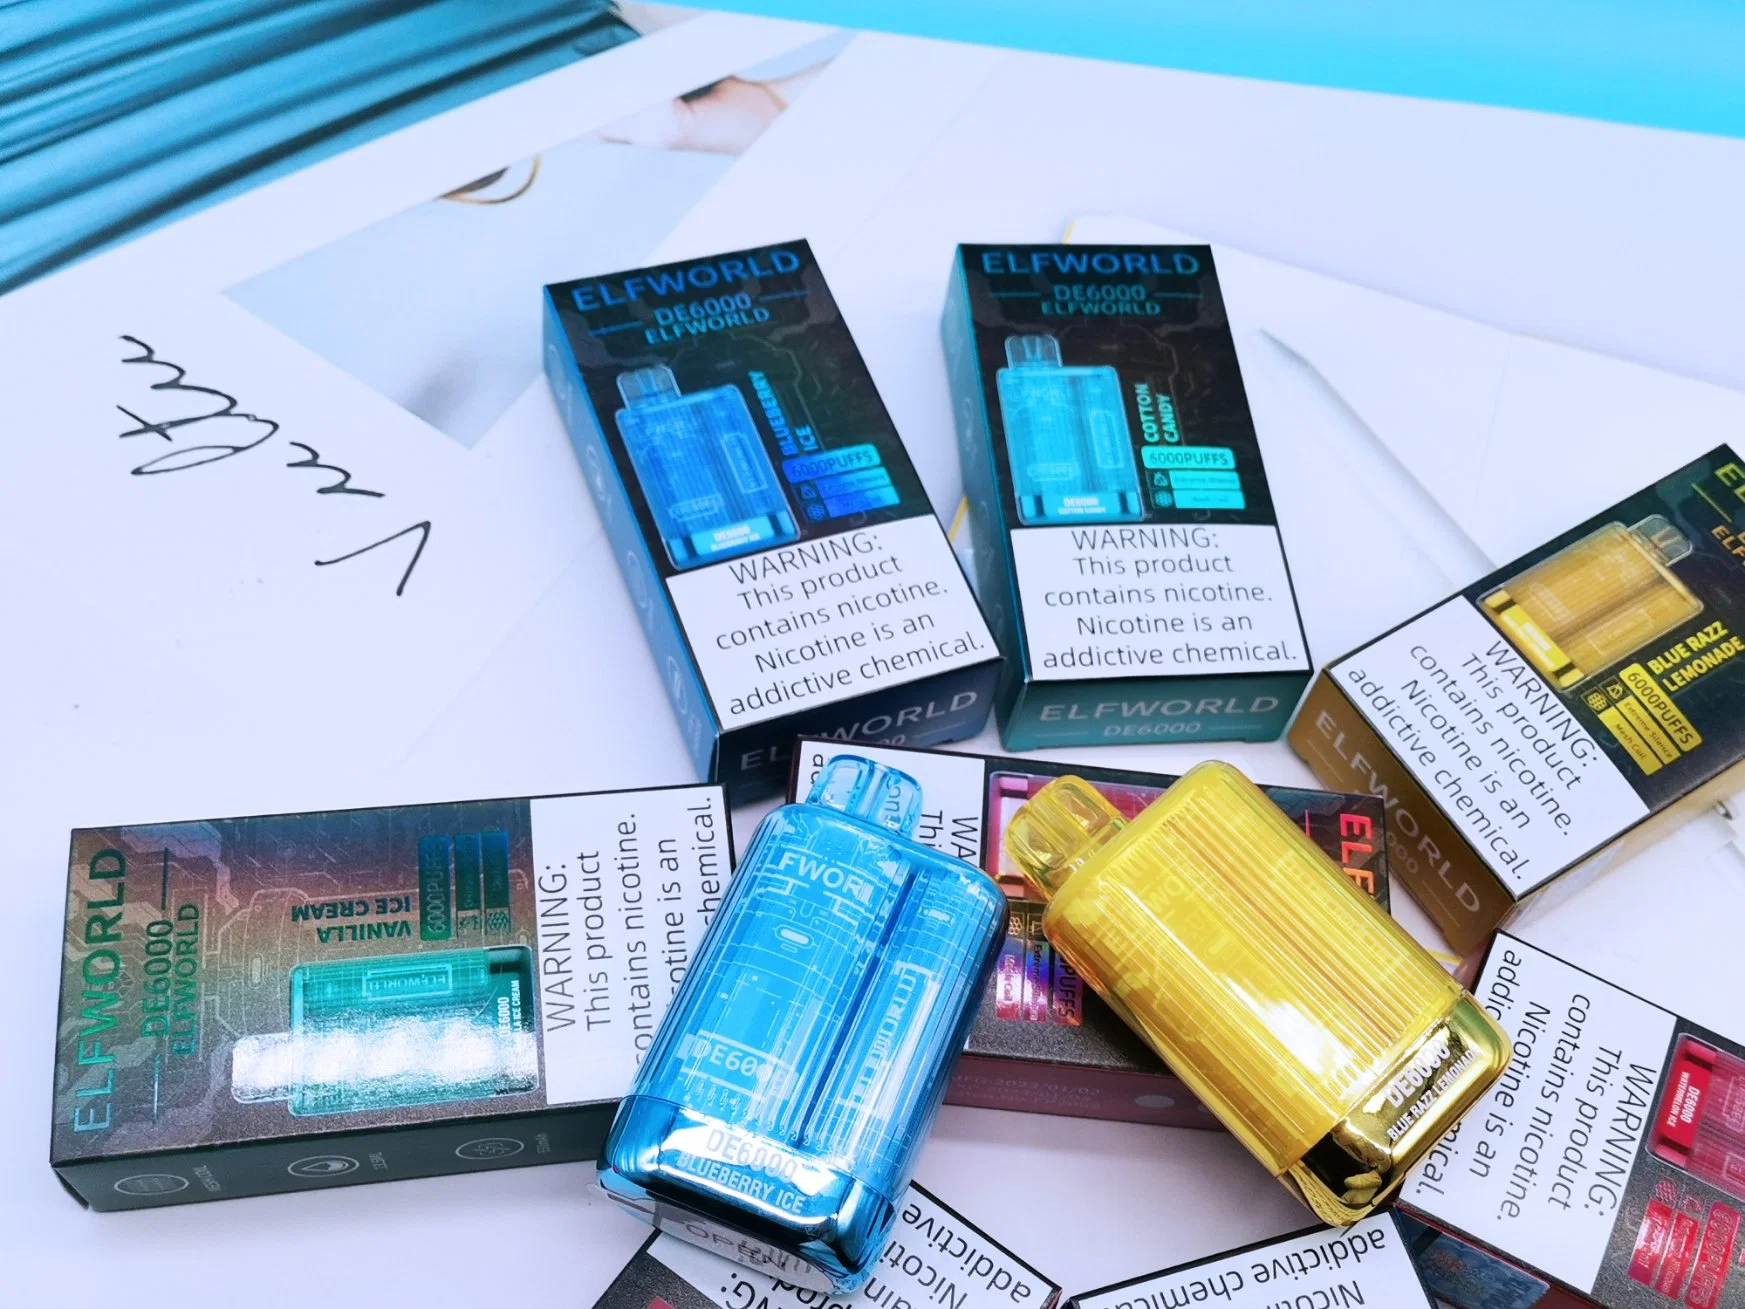 E Cigarette Disposable/Chargeable Vape Zovoo Disposable/Chargeable Vape Elux Legend 3500 Disposable/Chargeable Vape Te6000 Te5000 Puff Vape Elfworld De 6000 Puff 15 Flavor 5%2%0%Nicotin